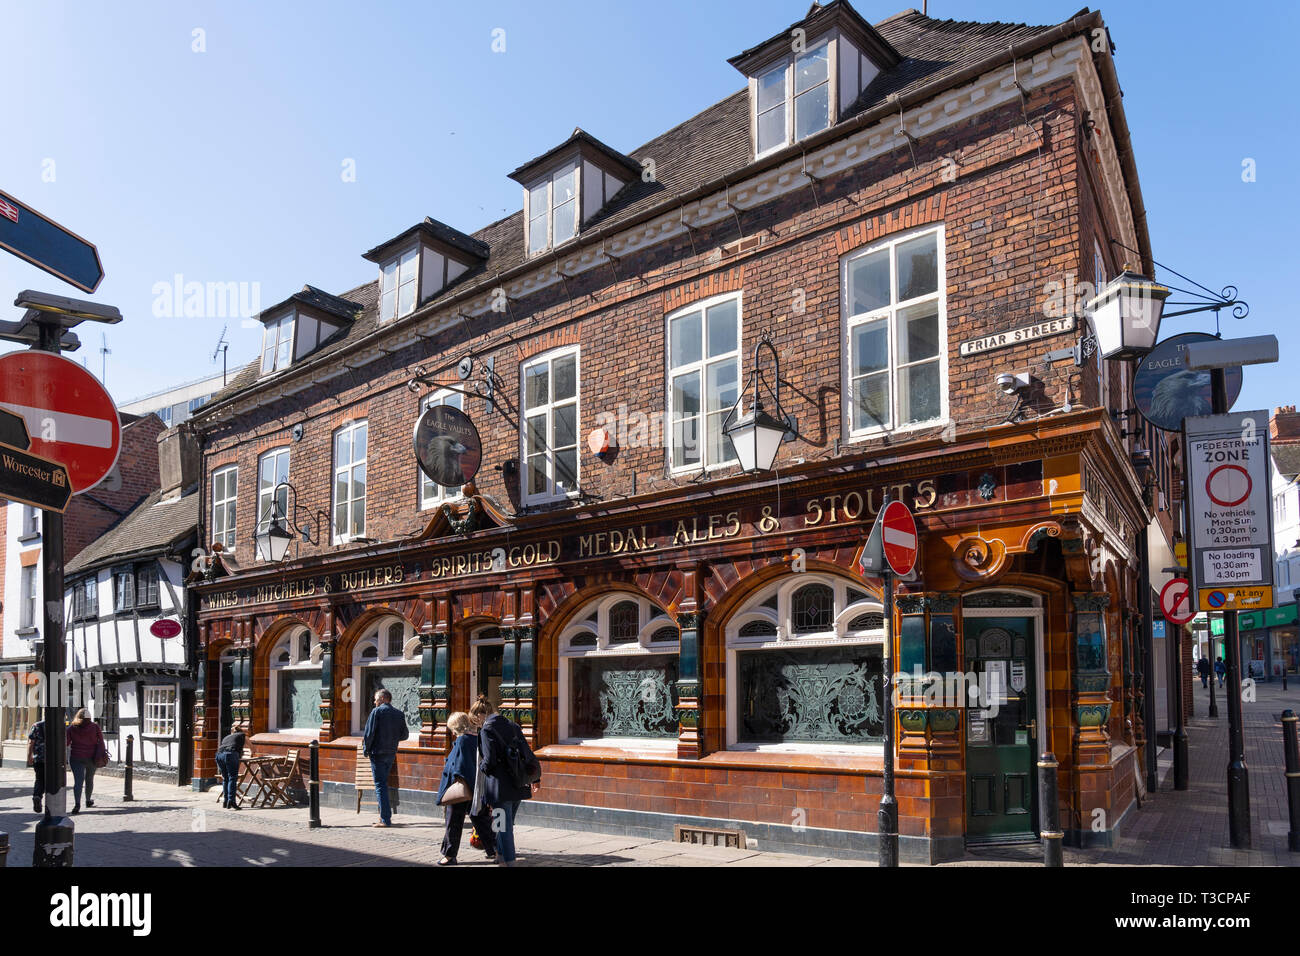 The Eagle Vaults Public House is a traditional local pub and a Grade II listed building with a tiled facade and etched windows in Worcester, England Stock Photo